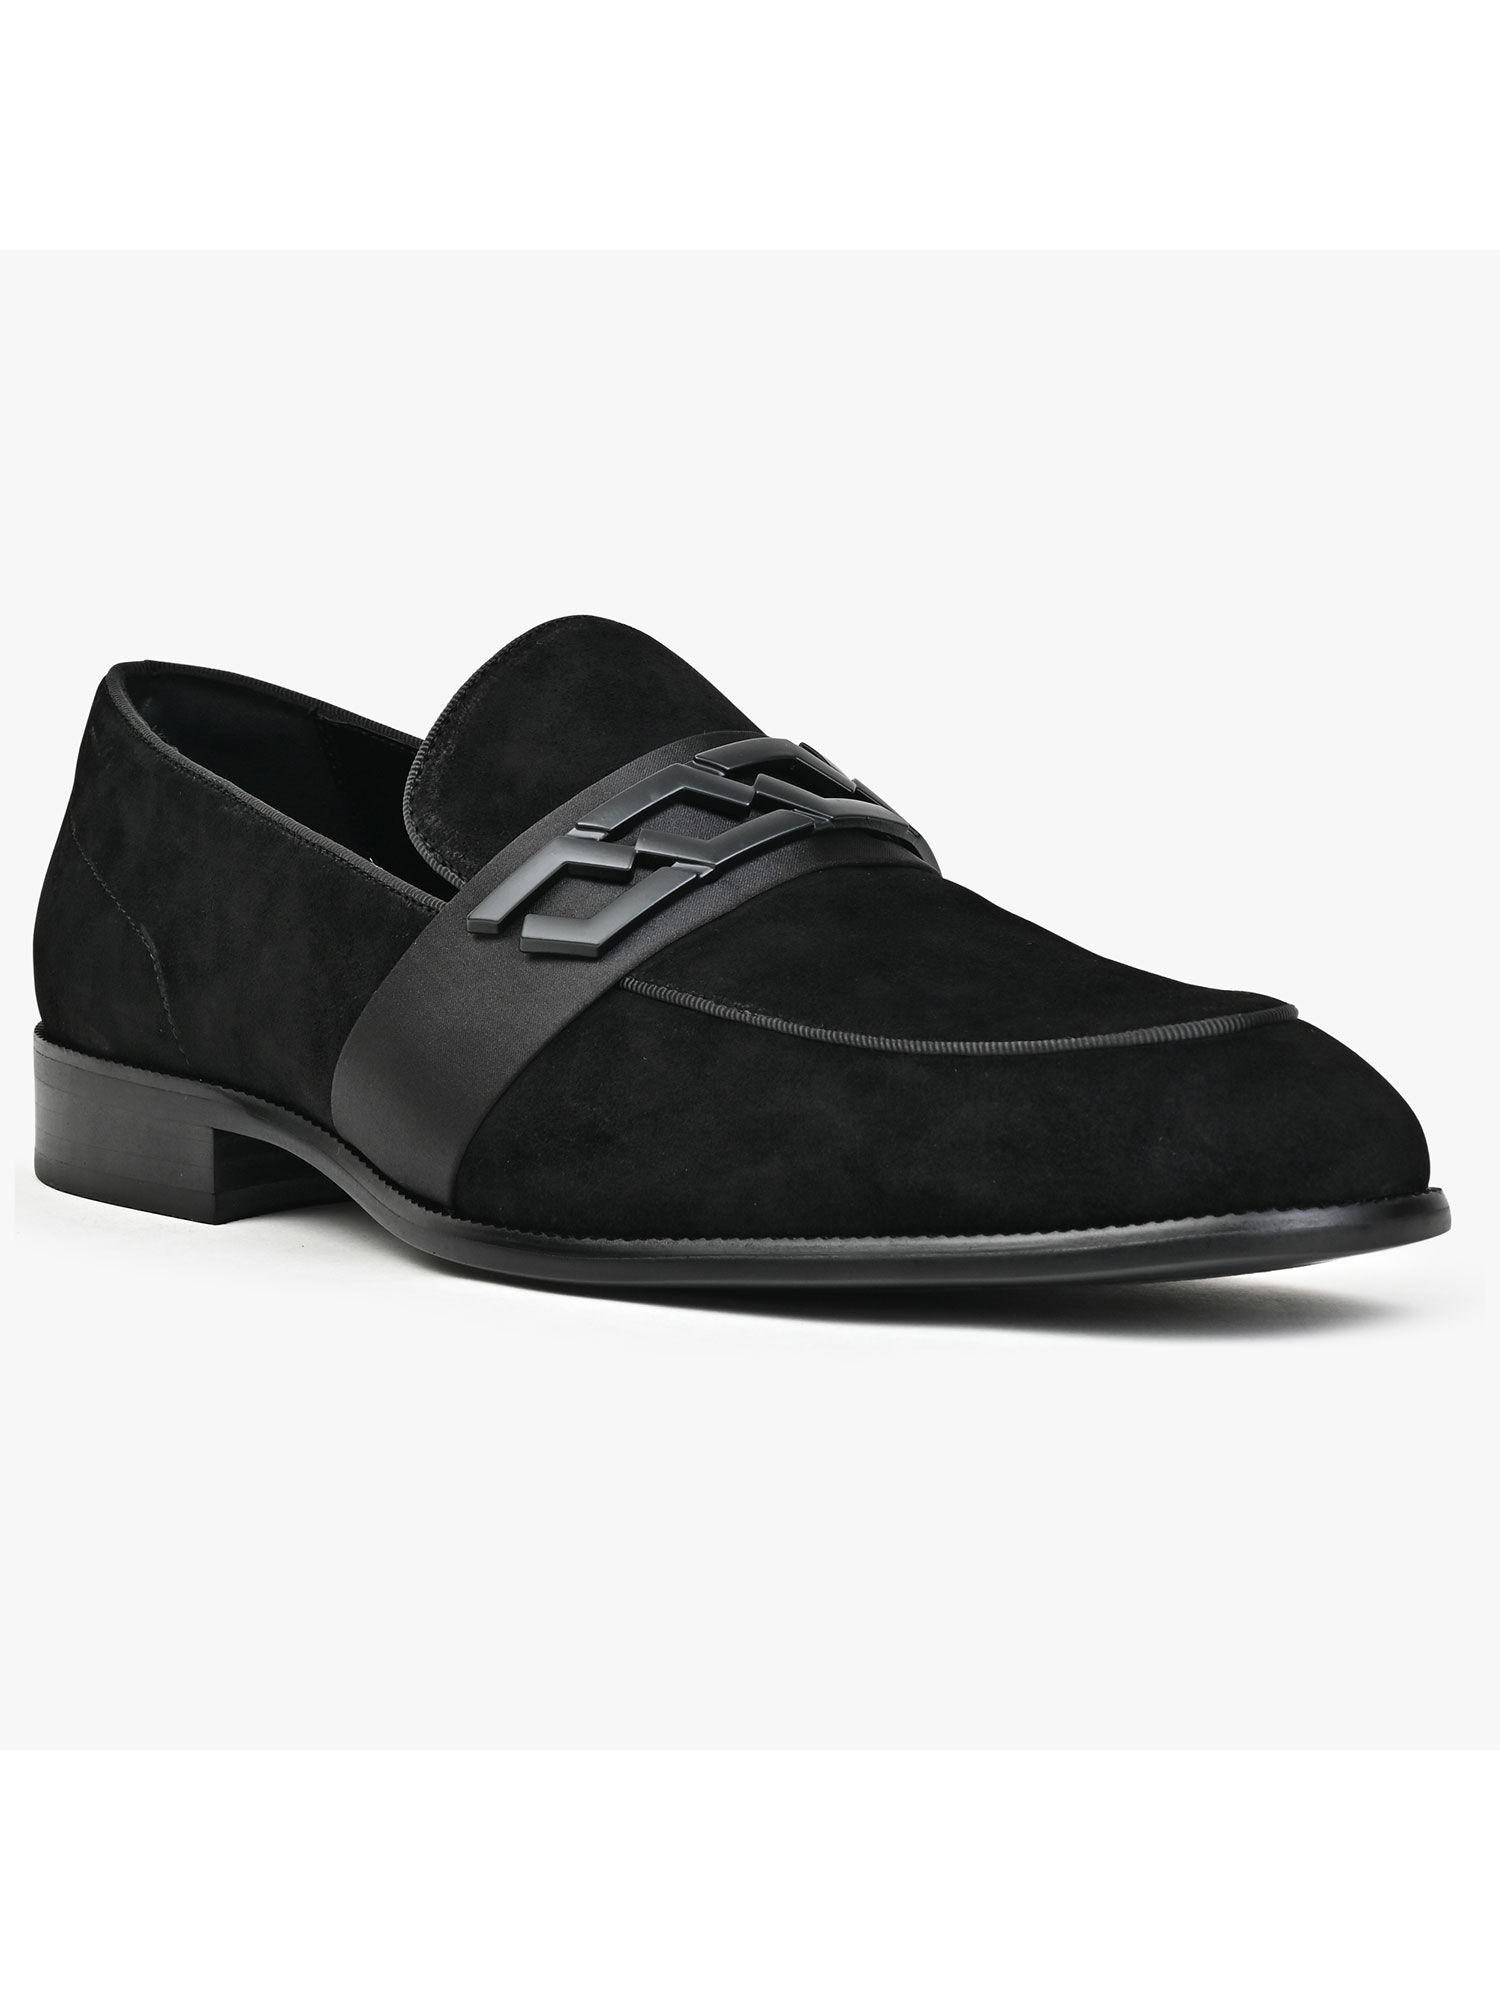 men-casual-loafers-black